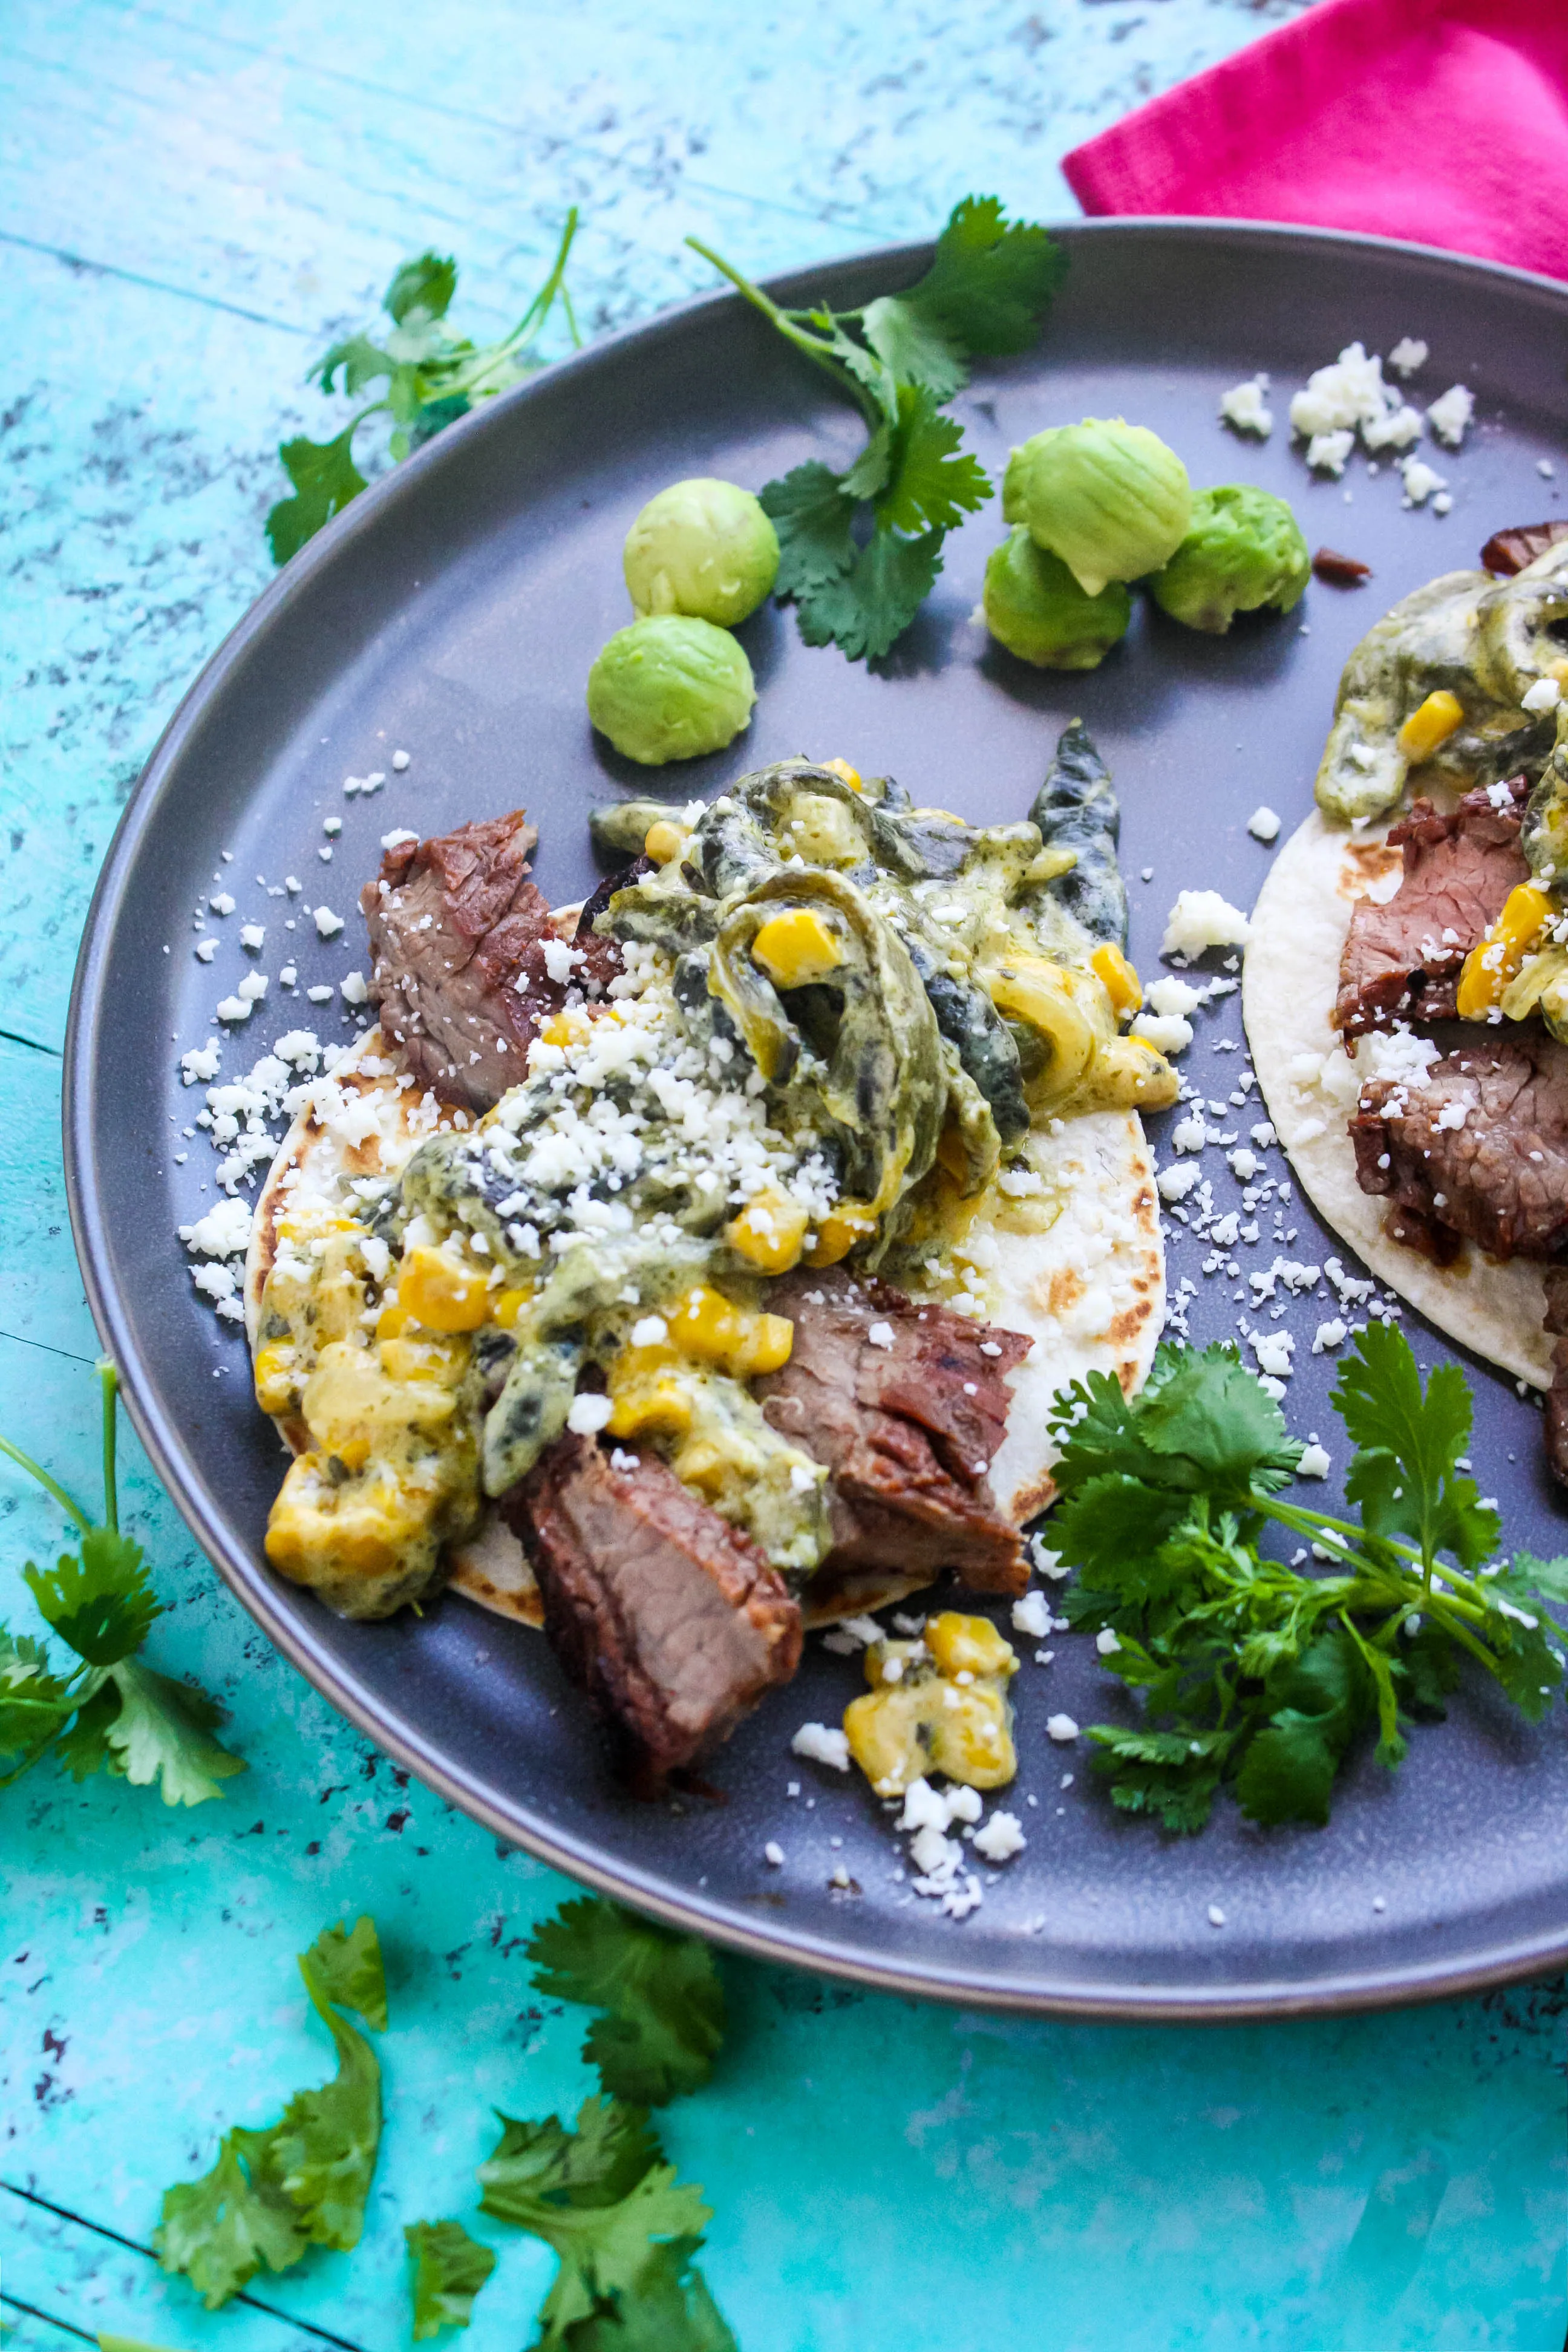 Steak Tacos with Poblano Pepper Strips and Cream Sauce (Rajas con Crema) makes a fantastic dish for taco night! You'll really enjoy these Steak Tacos with Poblano Pepper Strips and Cream Sauce (Rajas con Crema)!